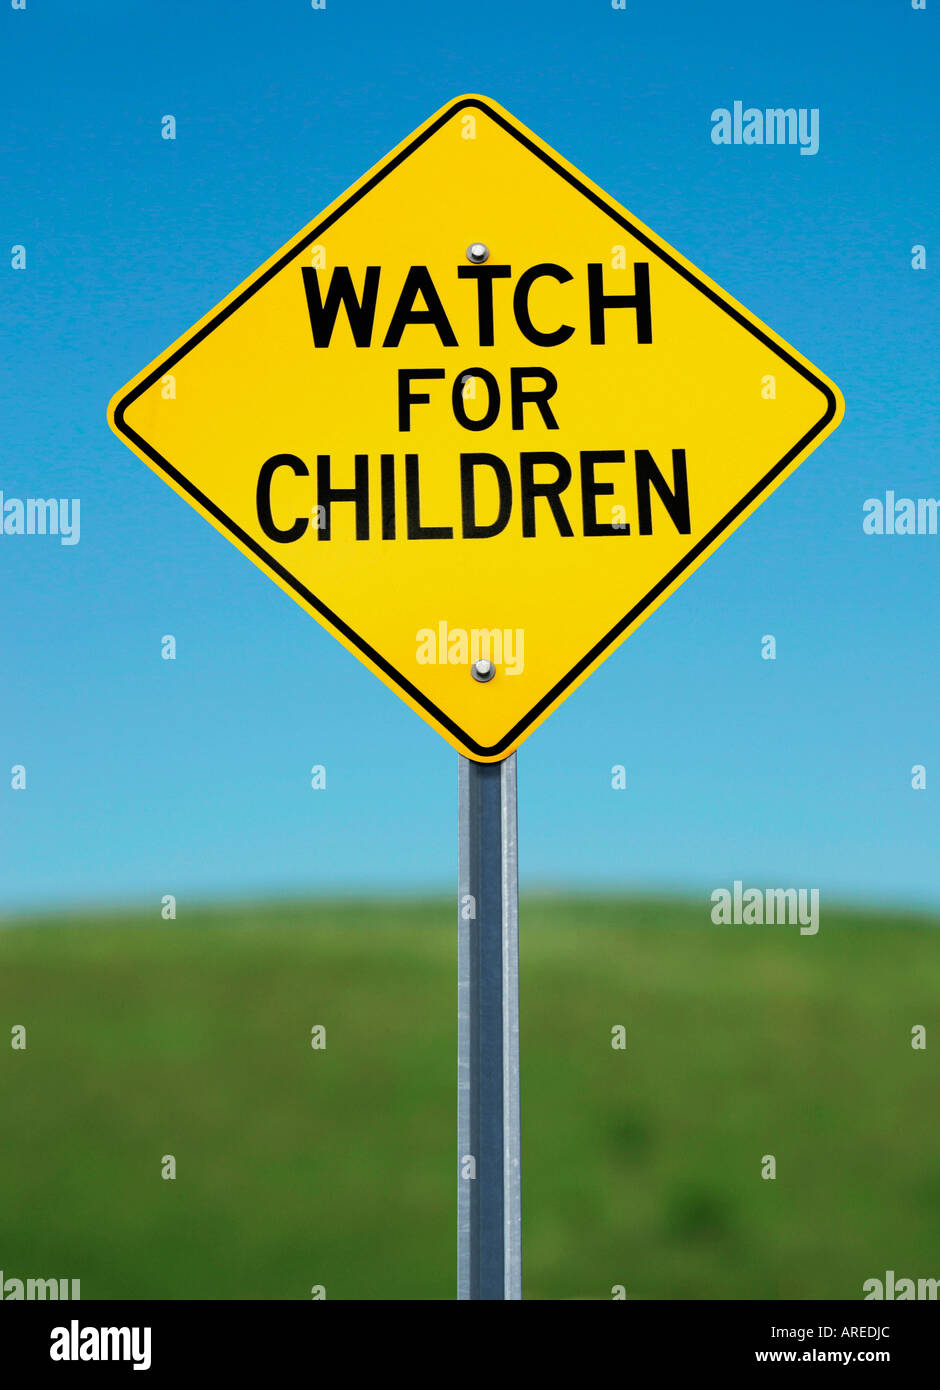 WATCH FOR CHILDREN warning sign Stock Photo